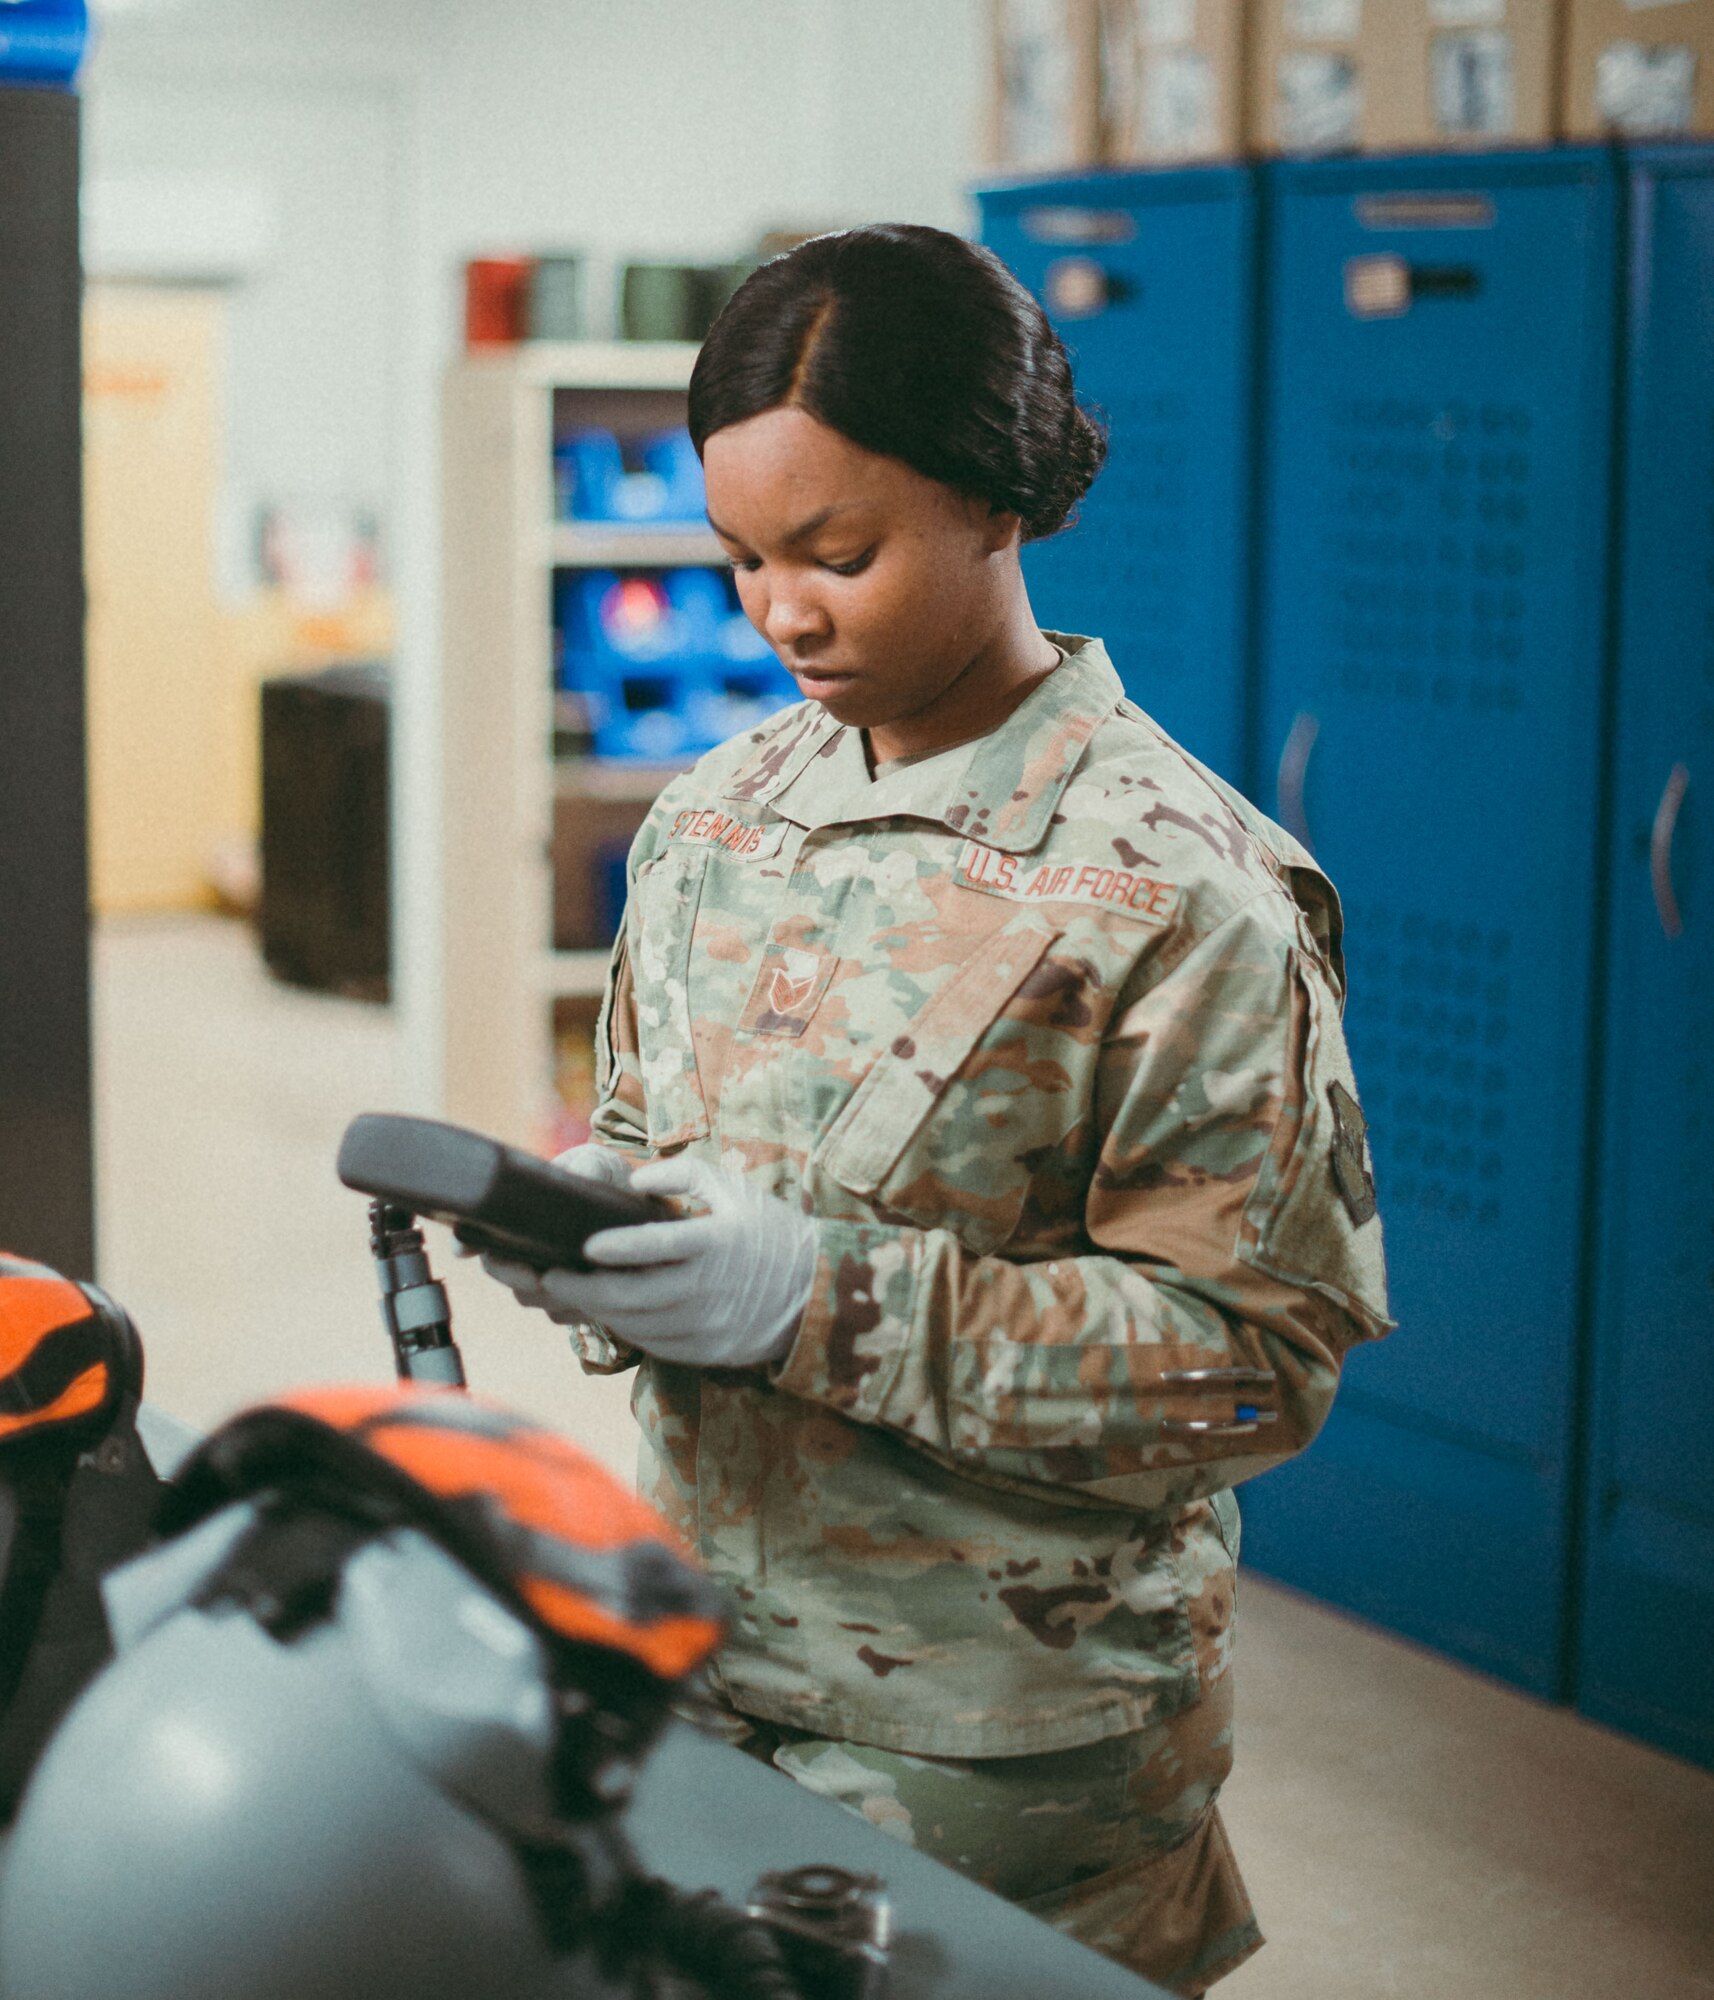 U.S. Air Force Staff Sgt. Kayla Stennis, 391st Expeditionary Fighter Squadron aircrew flight equipment craftsman, ensures oxygen masks are operational February 14, 2019 in Southwest Asia. After every mission, aircrew members return their equipment to the AFE shop where it is inspected, maintained and stored until their next flight. (U.S. Air Force photo by Staff Sgt. Delano Scott)